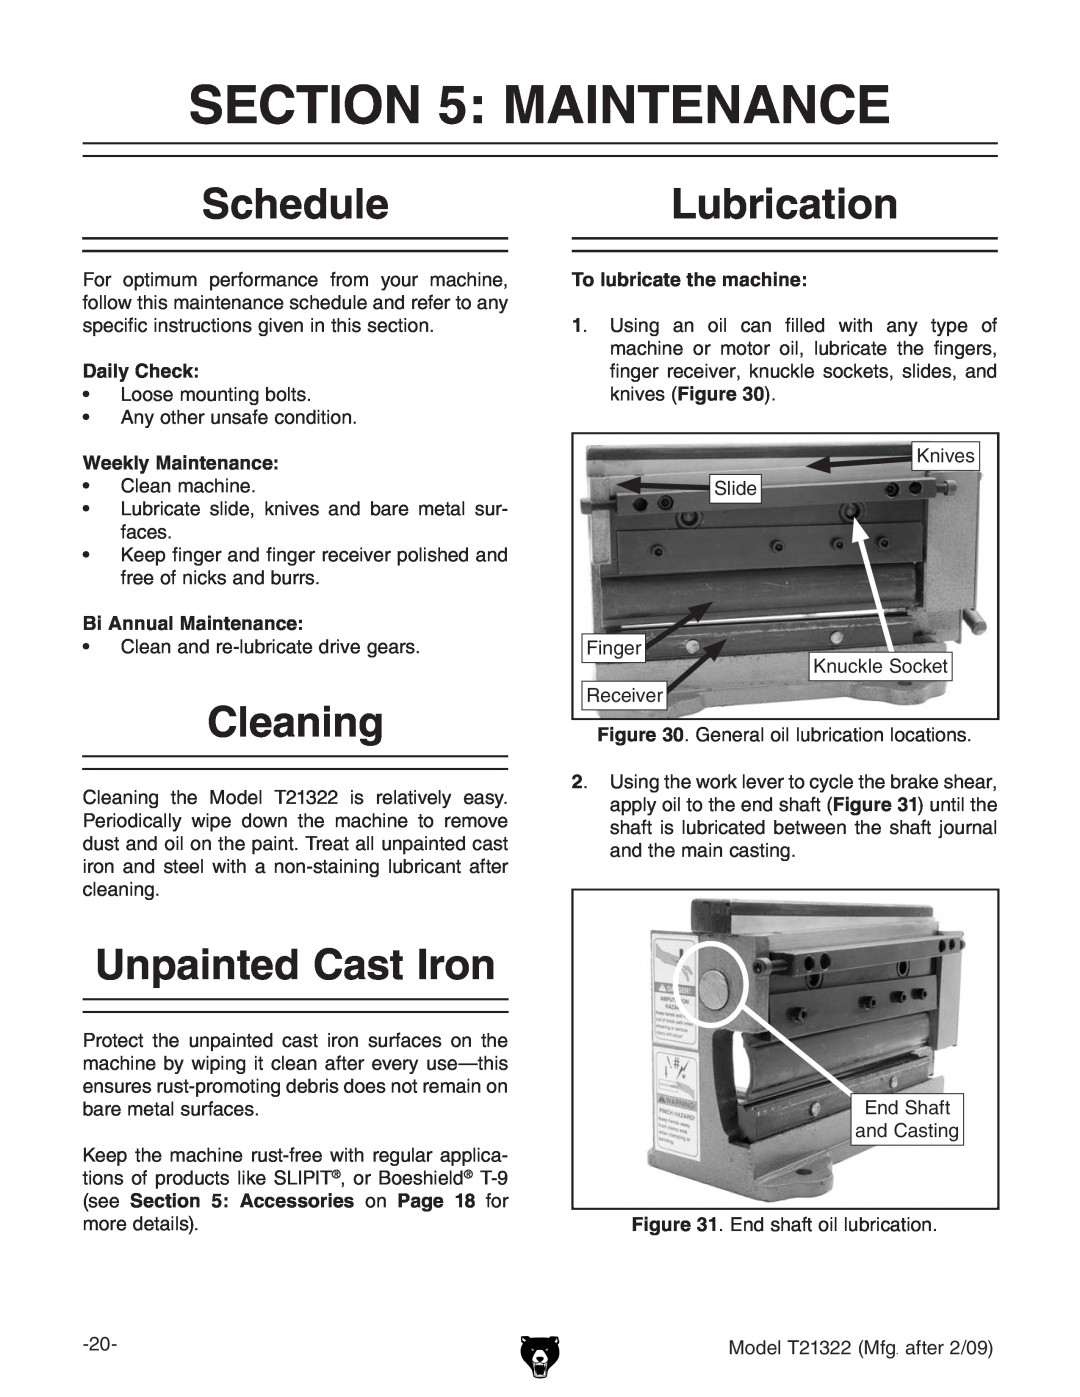 Grizzly T21322 owner manual Schedule, Cleaning, Unpainted Cast Iron, Lubrication, Daily Check, Bi Annual Maintenance 